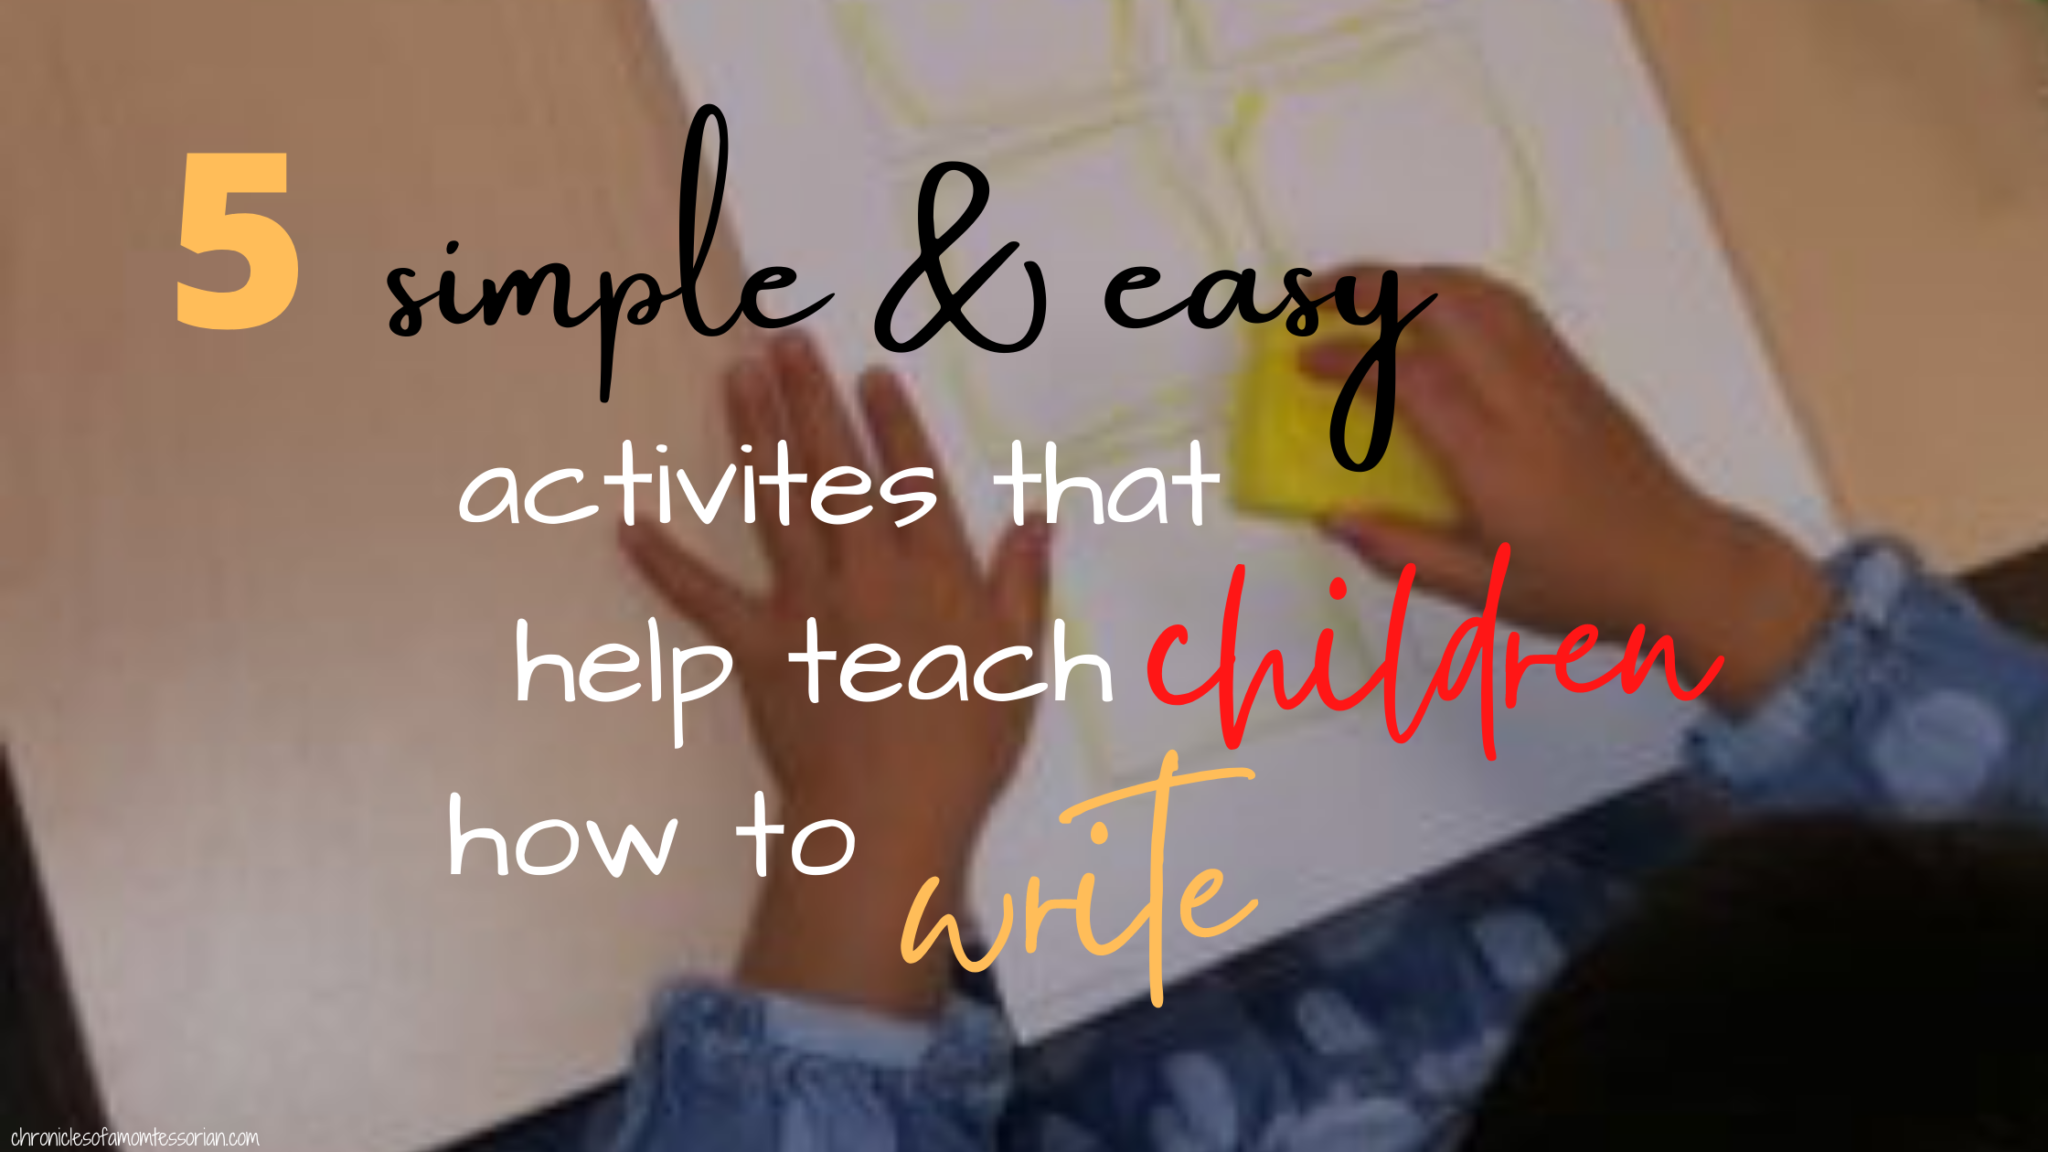 5 Simple Tips to Improve Handwriting for Children - Homeschooling